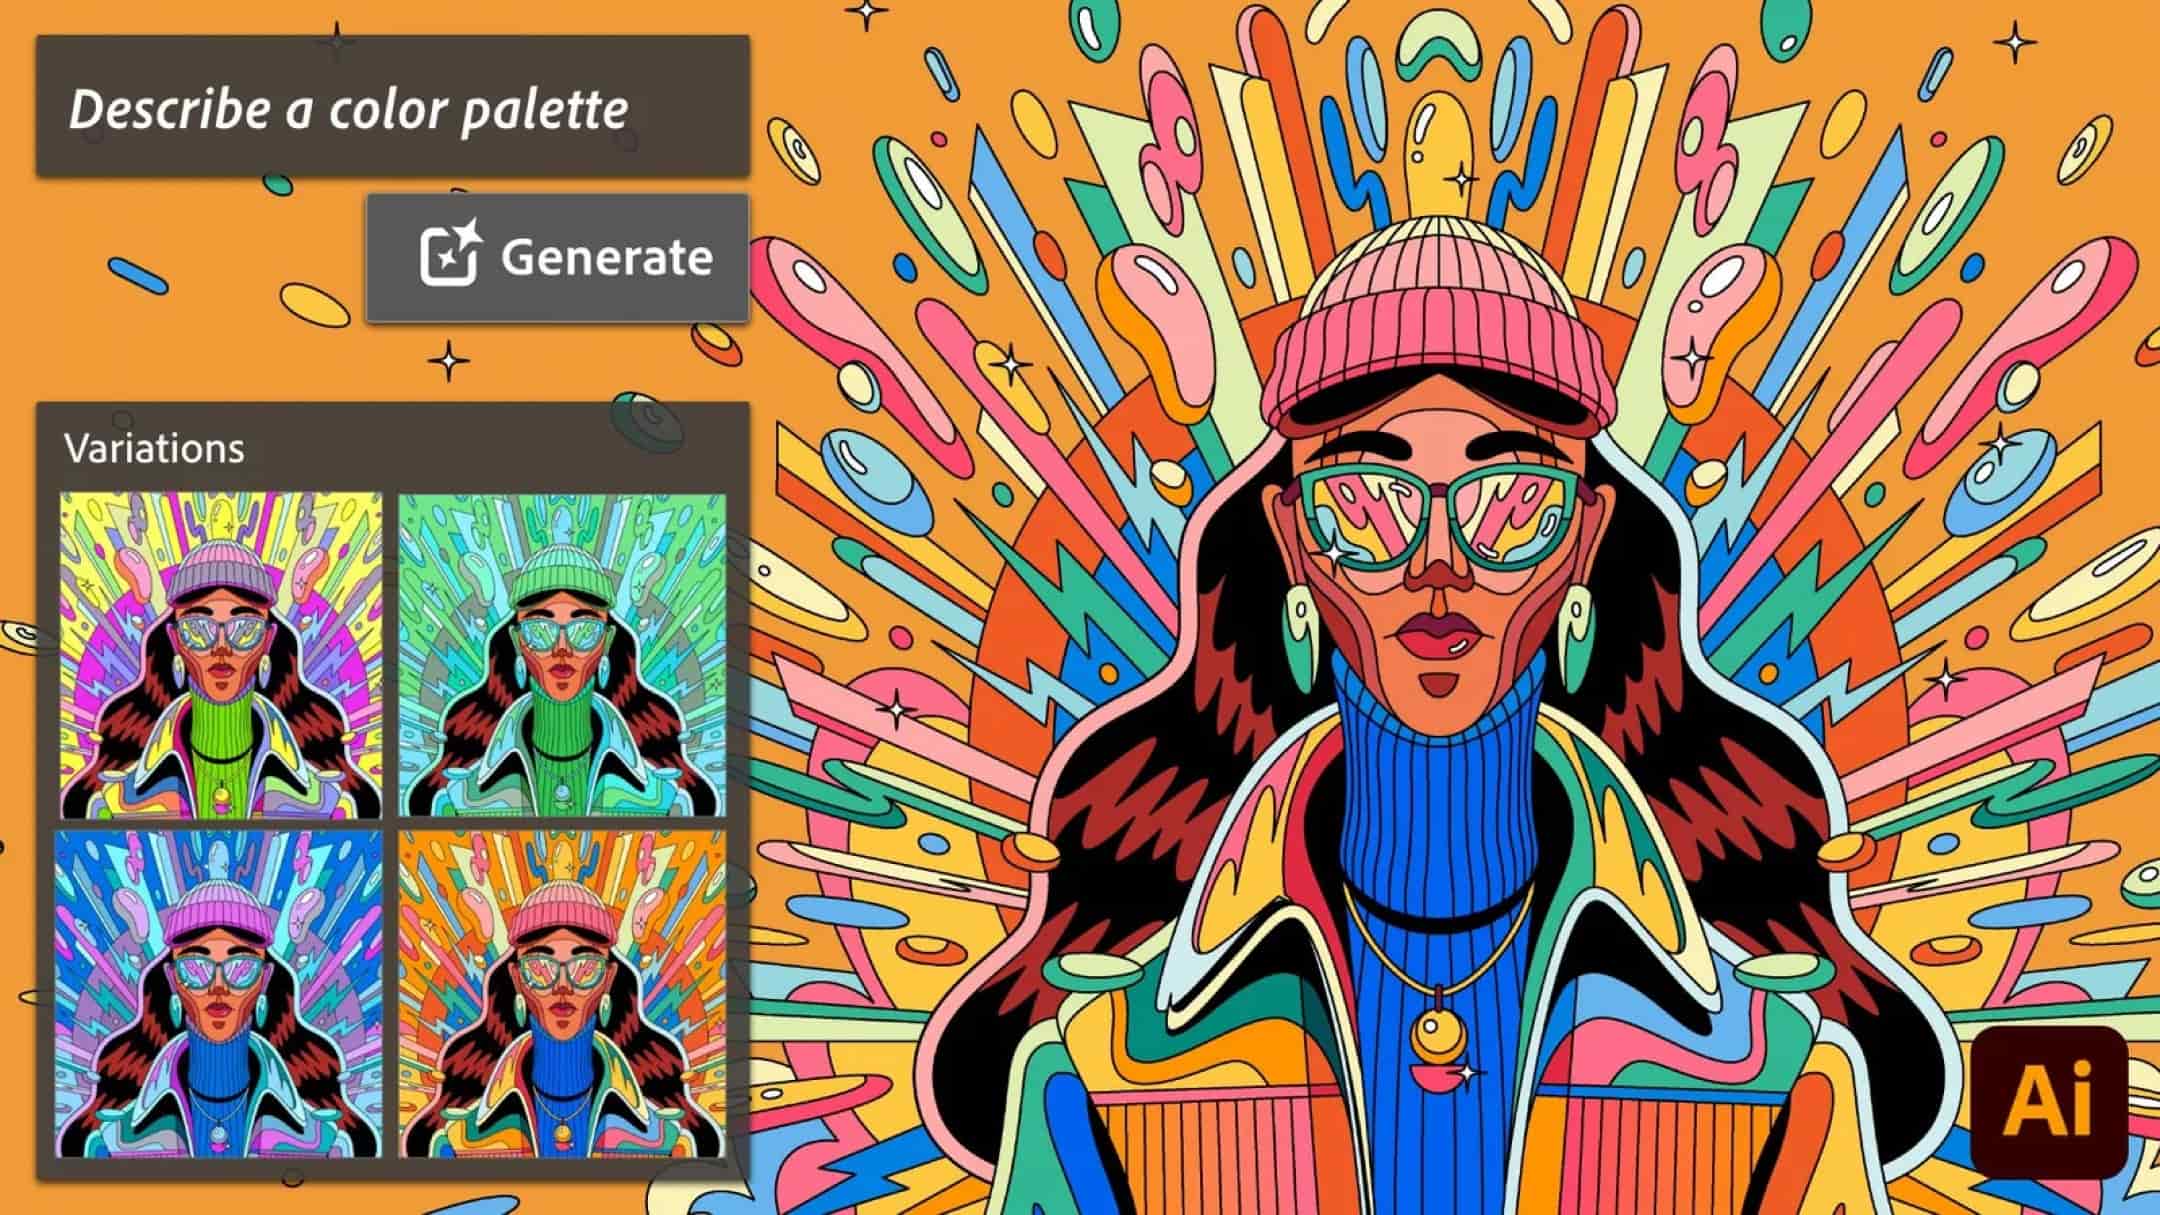 Adobe Illustrator: Enhance your designs with this new AI tool